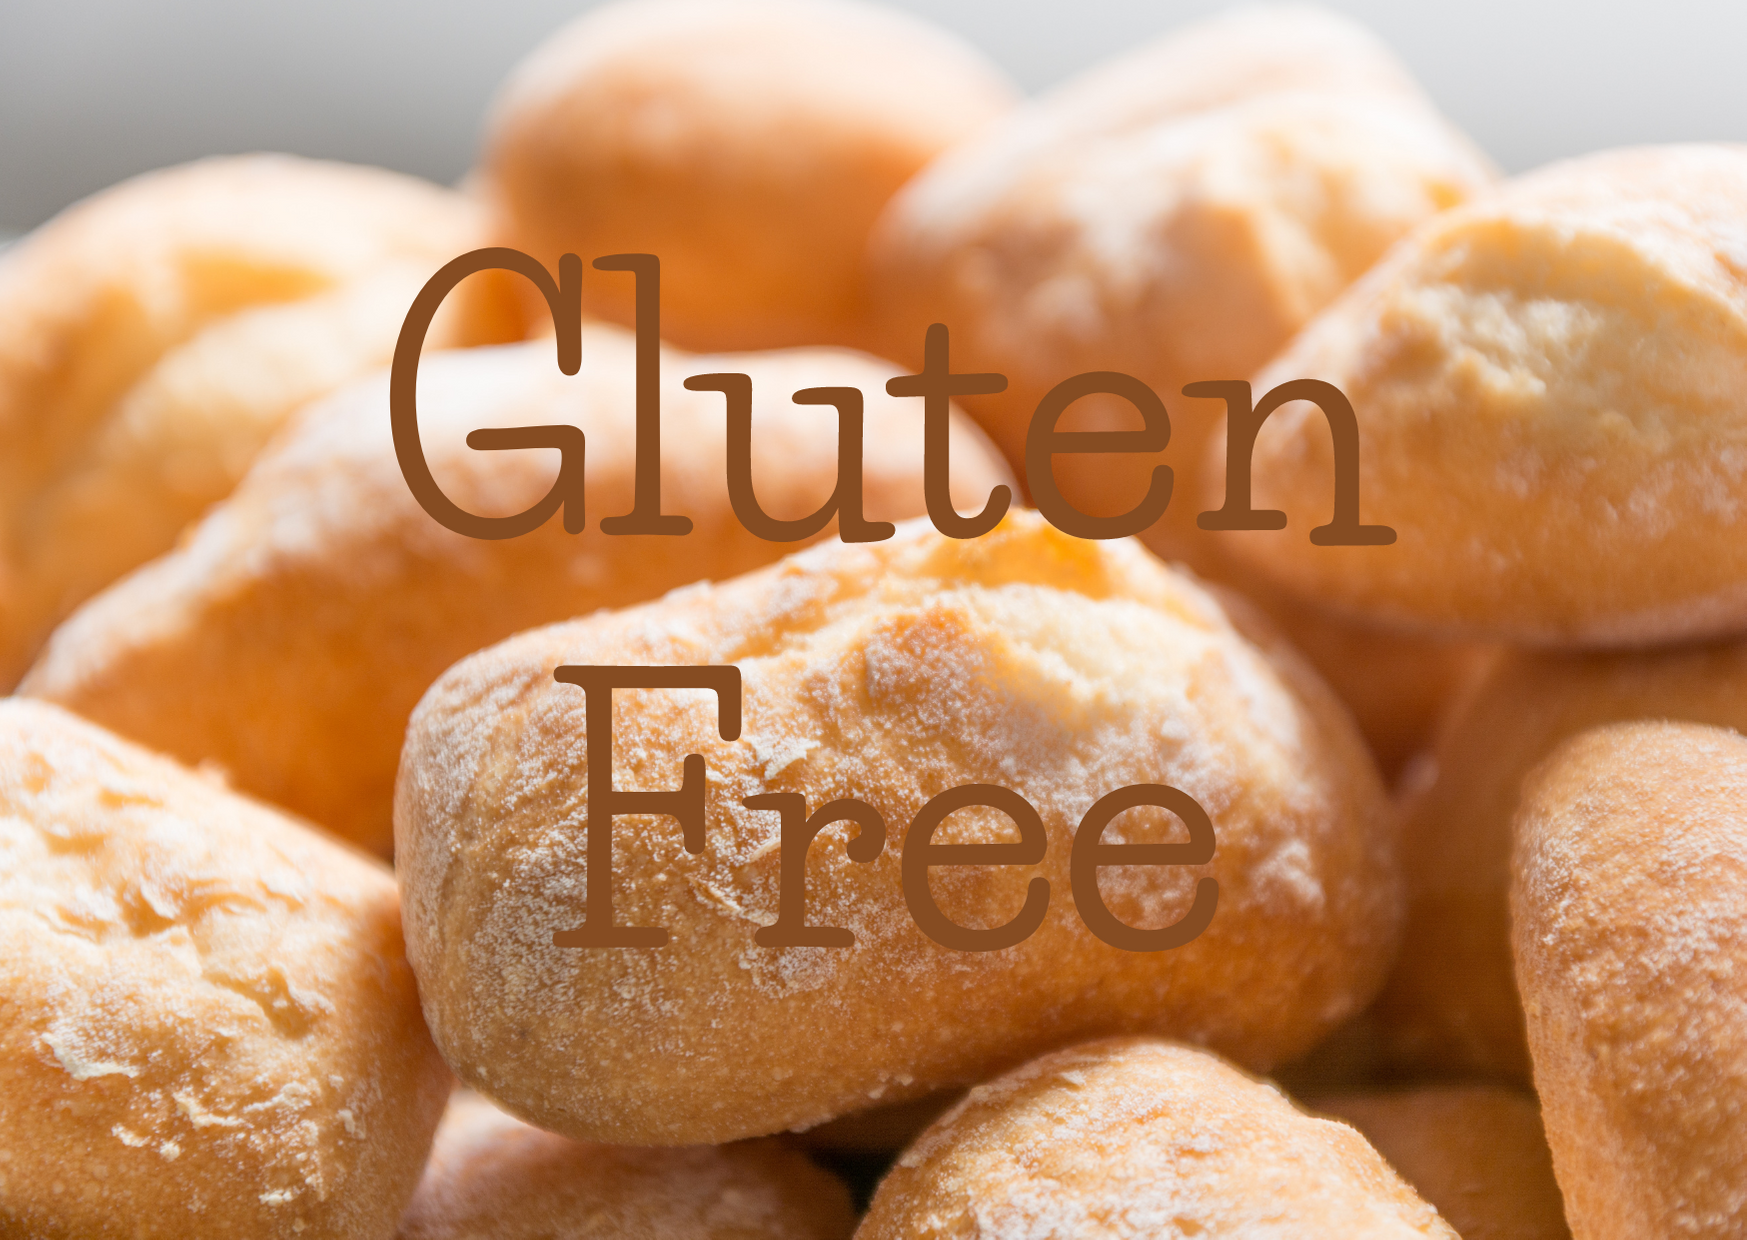 Coeliac Disease or Gluten Intolerant?  What’s the difference?